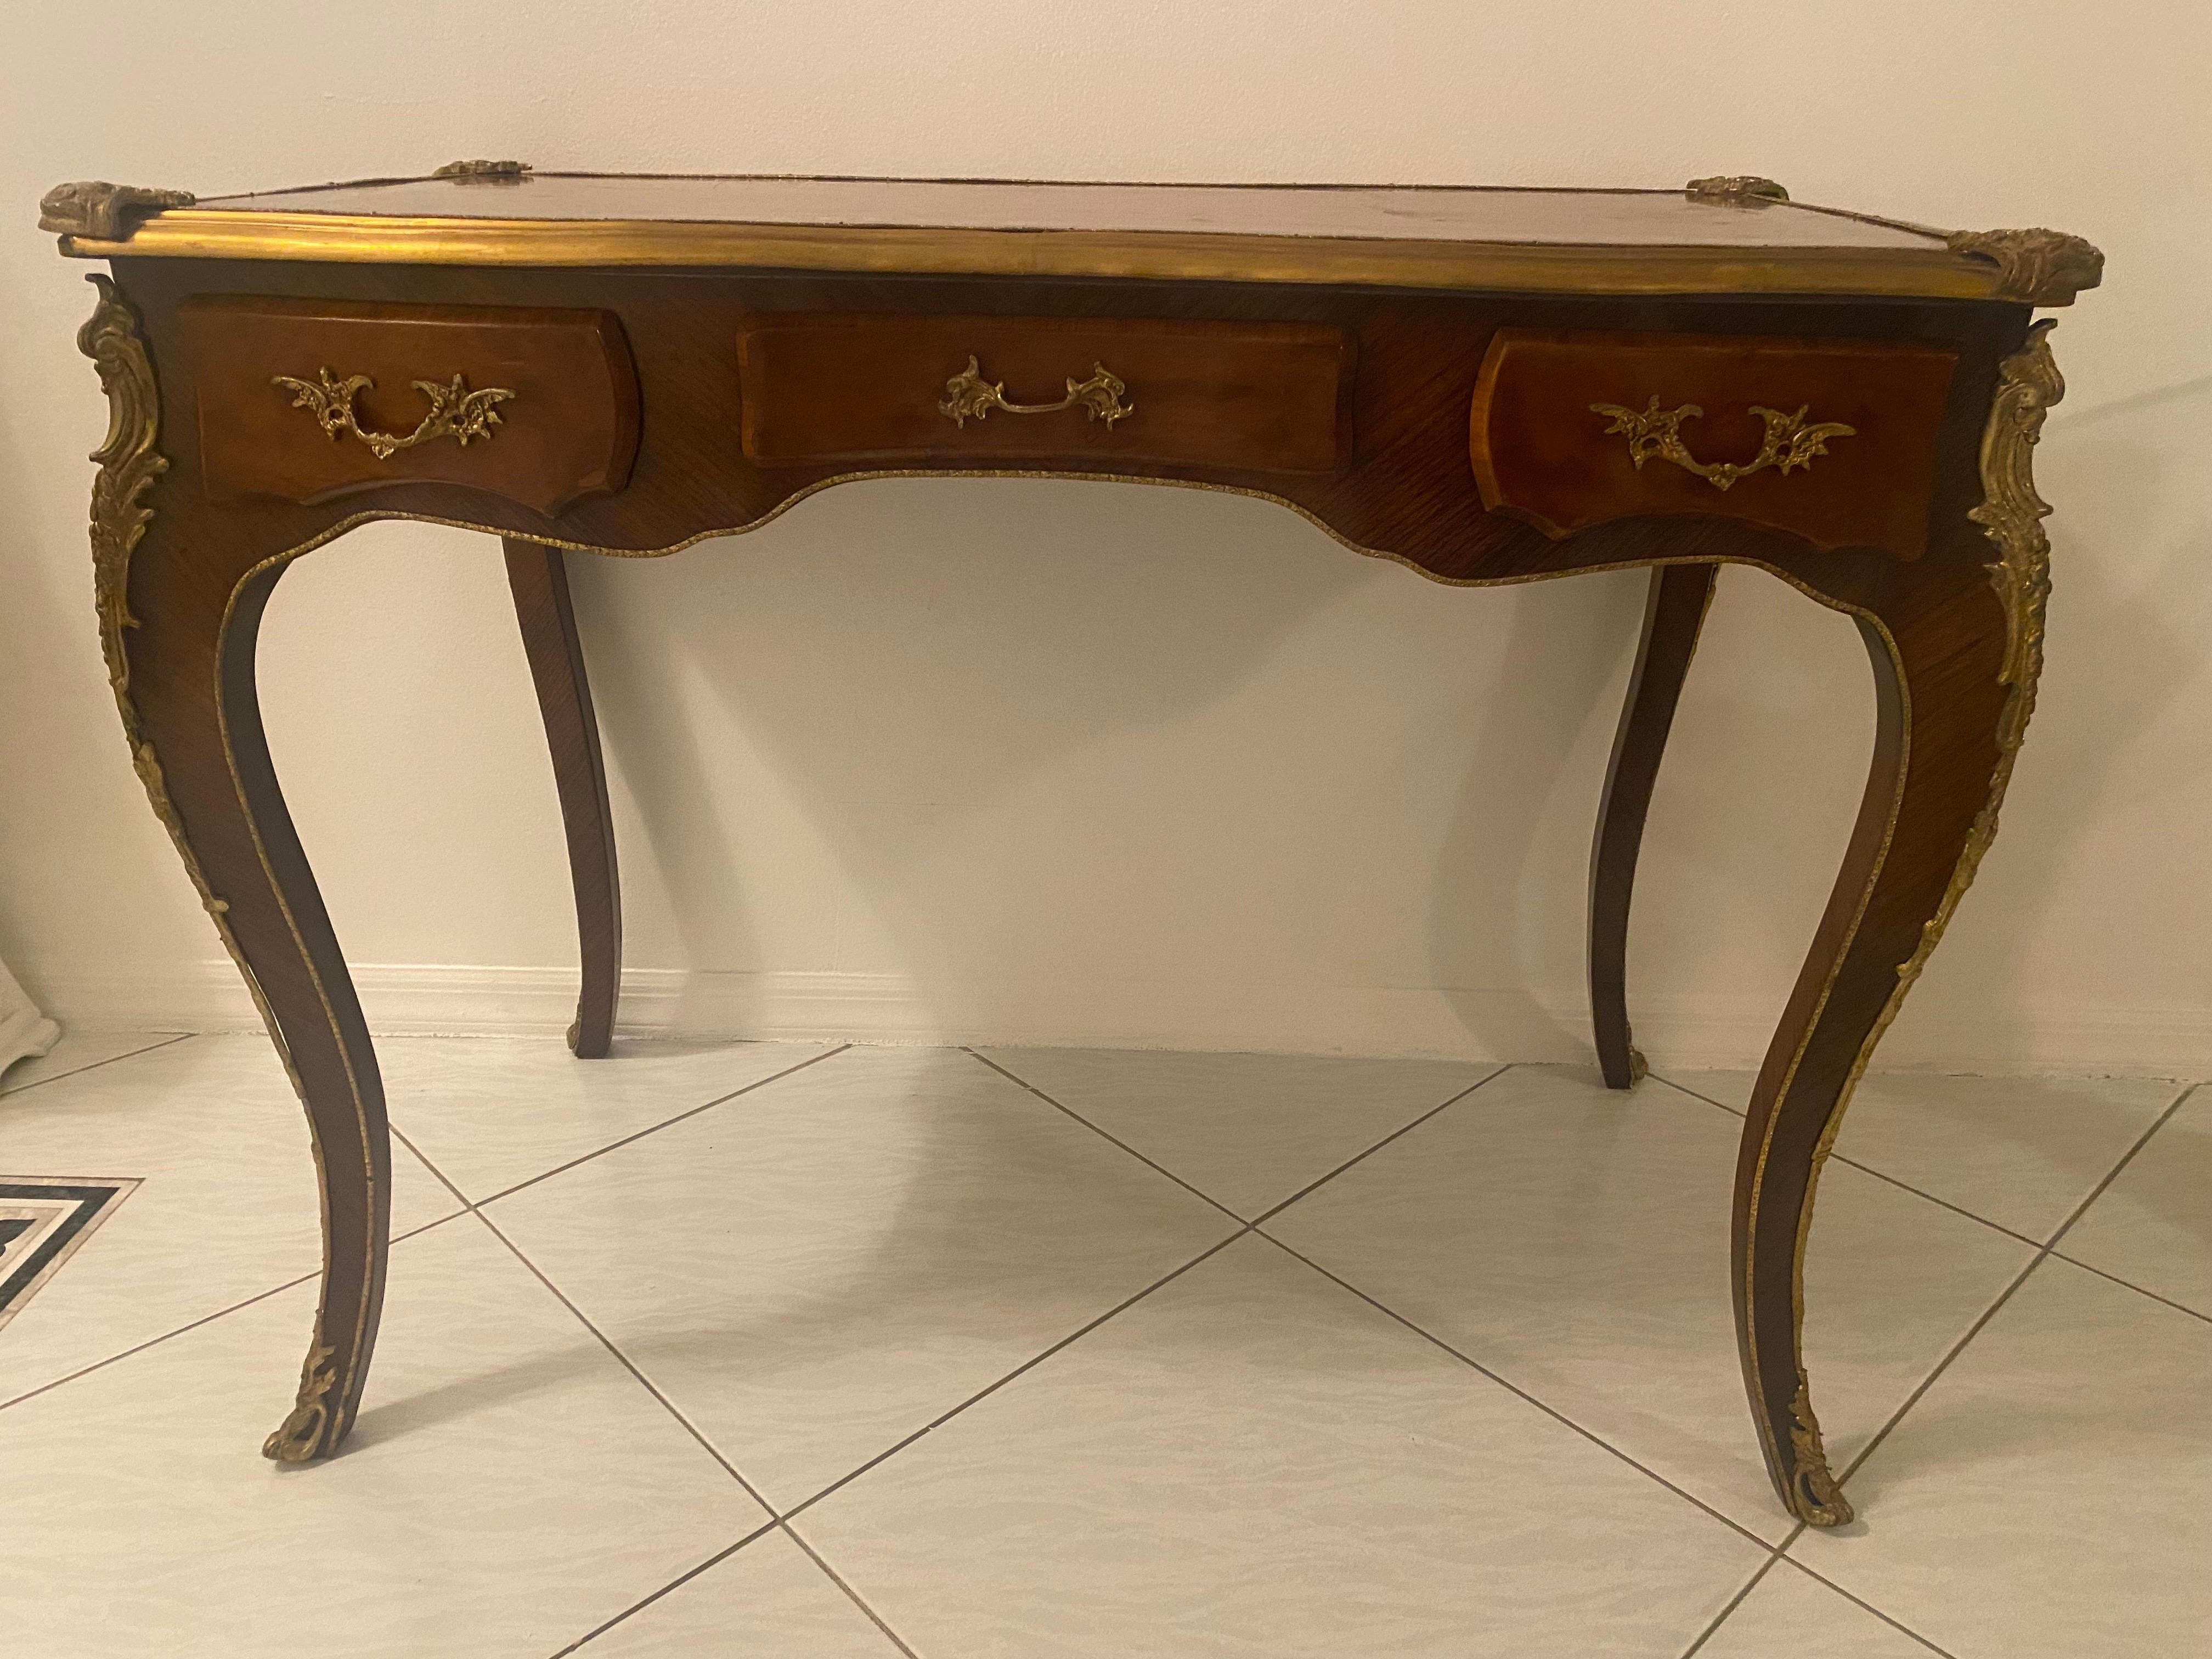 A perfect example of the Bureau Plat.

French Empire style desk with wood marquetry and gilt metal mounts at all angles. This piece features three working drawers on the front with three faux drawers on the back. The superb gilt metal hardware is on